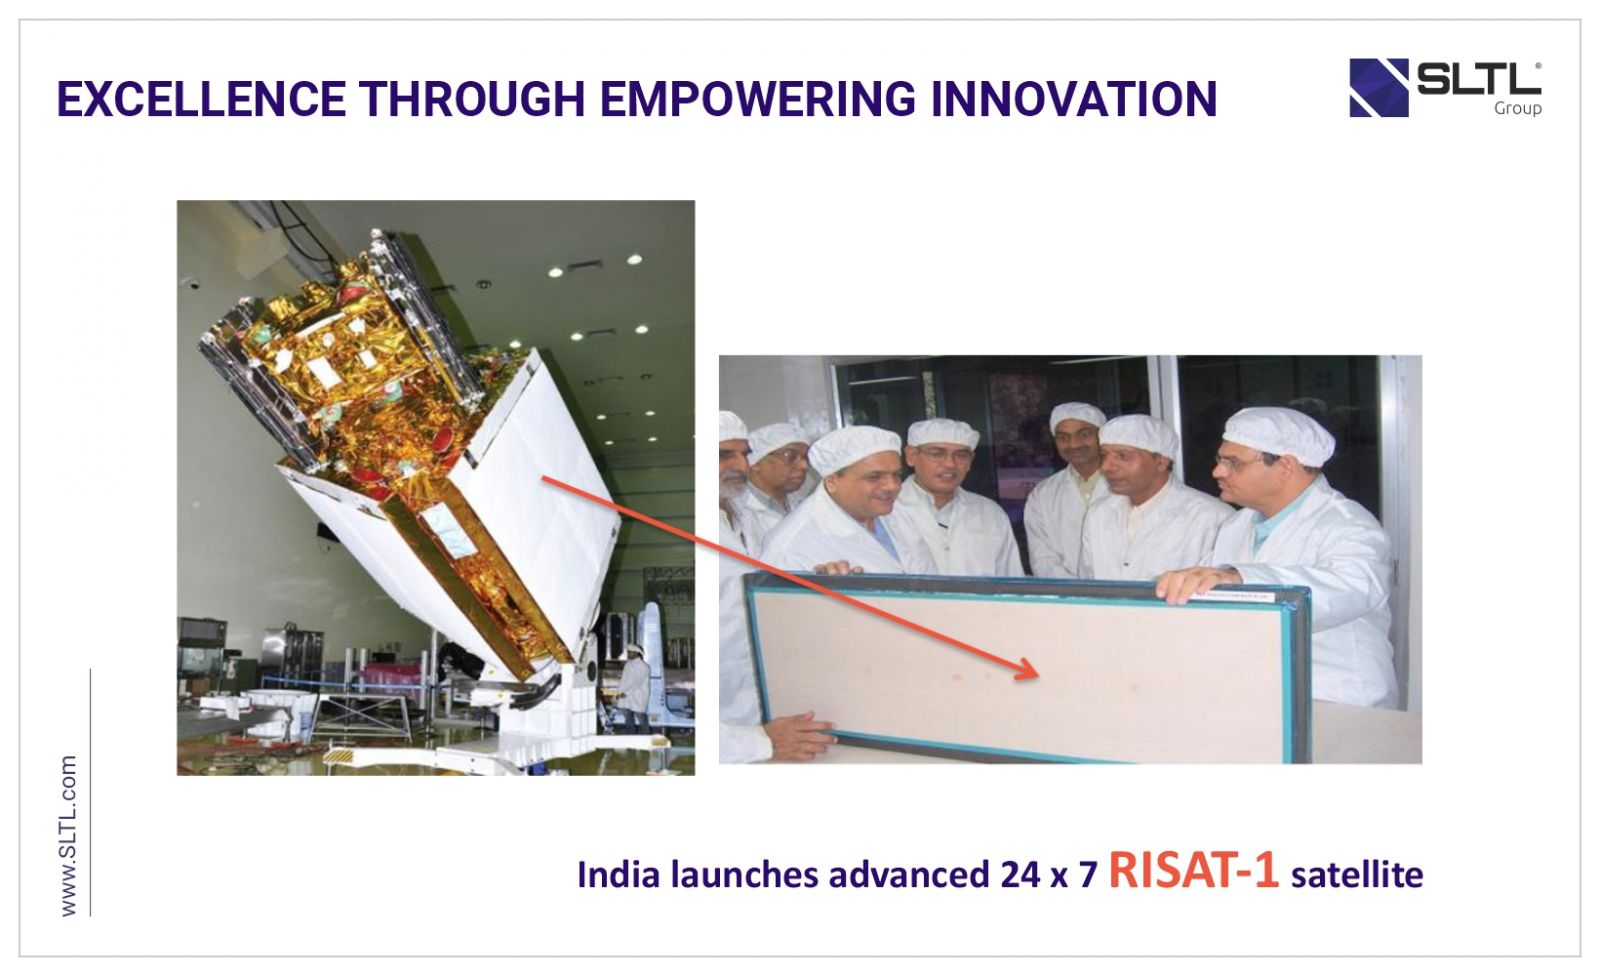 India Launched advance RISAT – 1 satellite